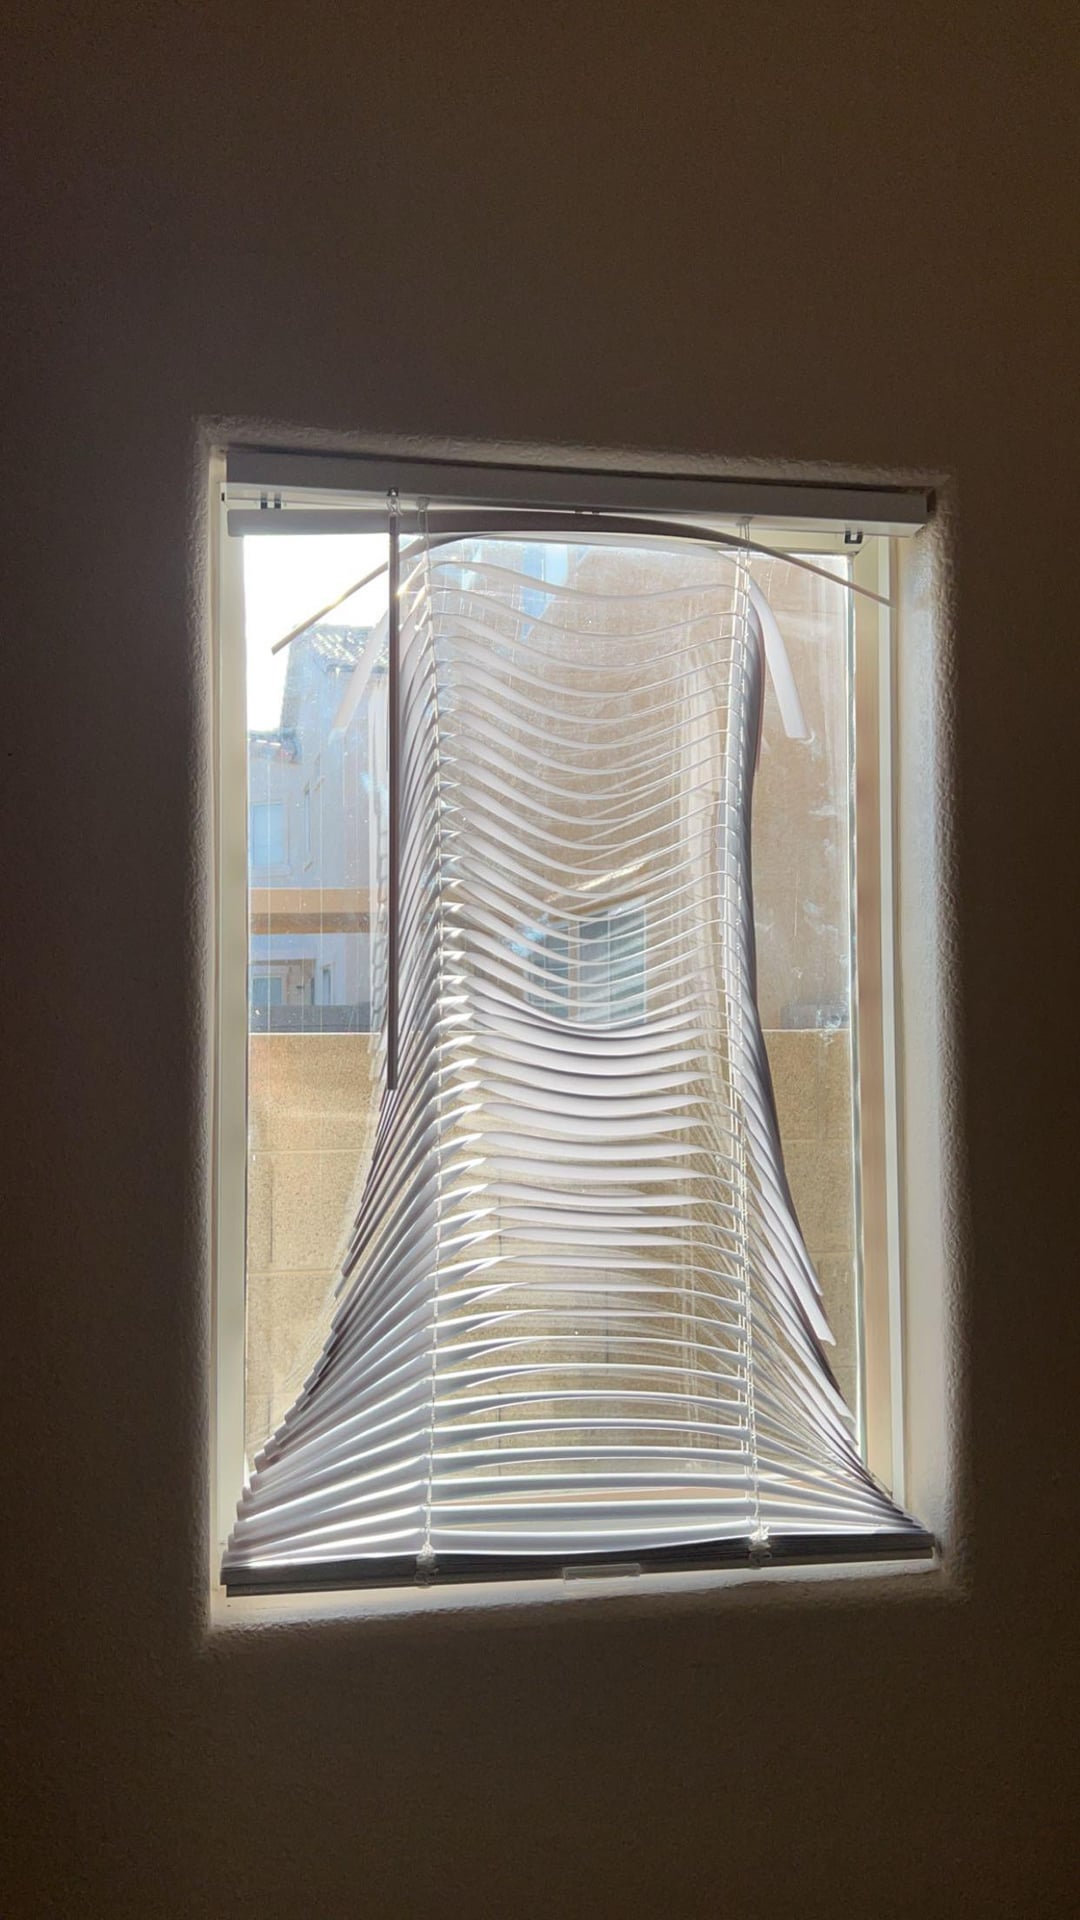 117-degrees-in-arizona-today-melted-the-blinds-in-my-house-v0-ujoxyhayhzad1.jpeg